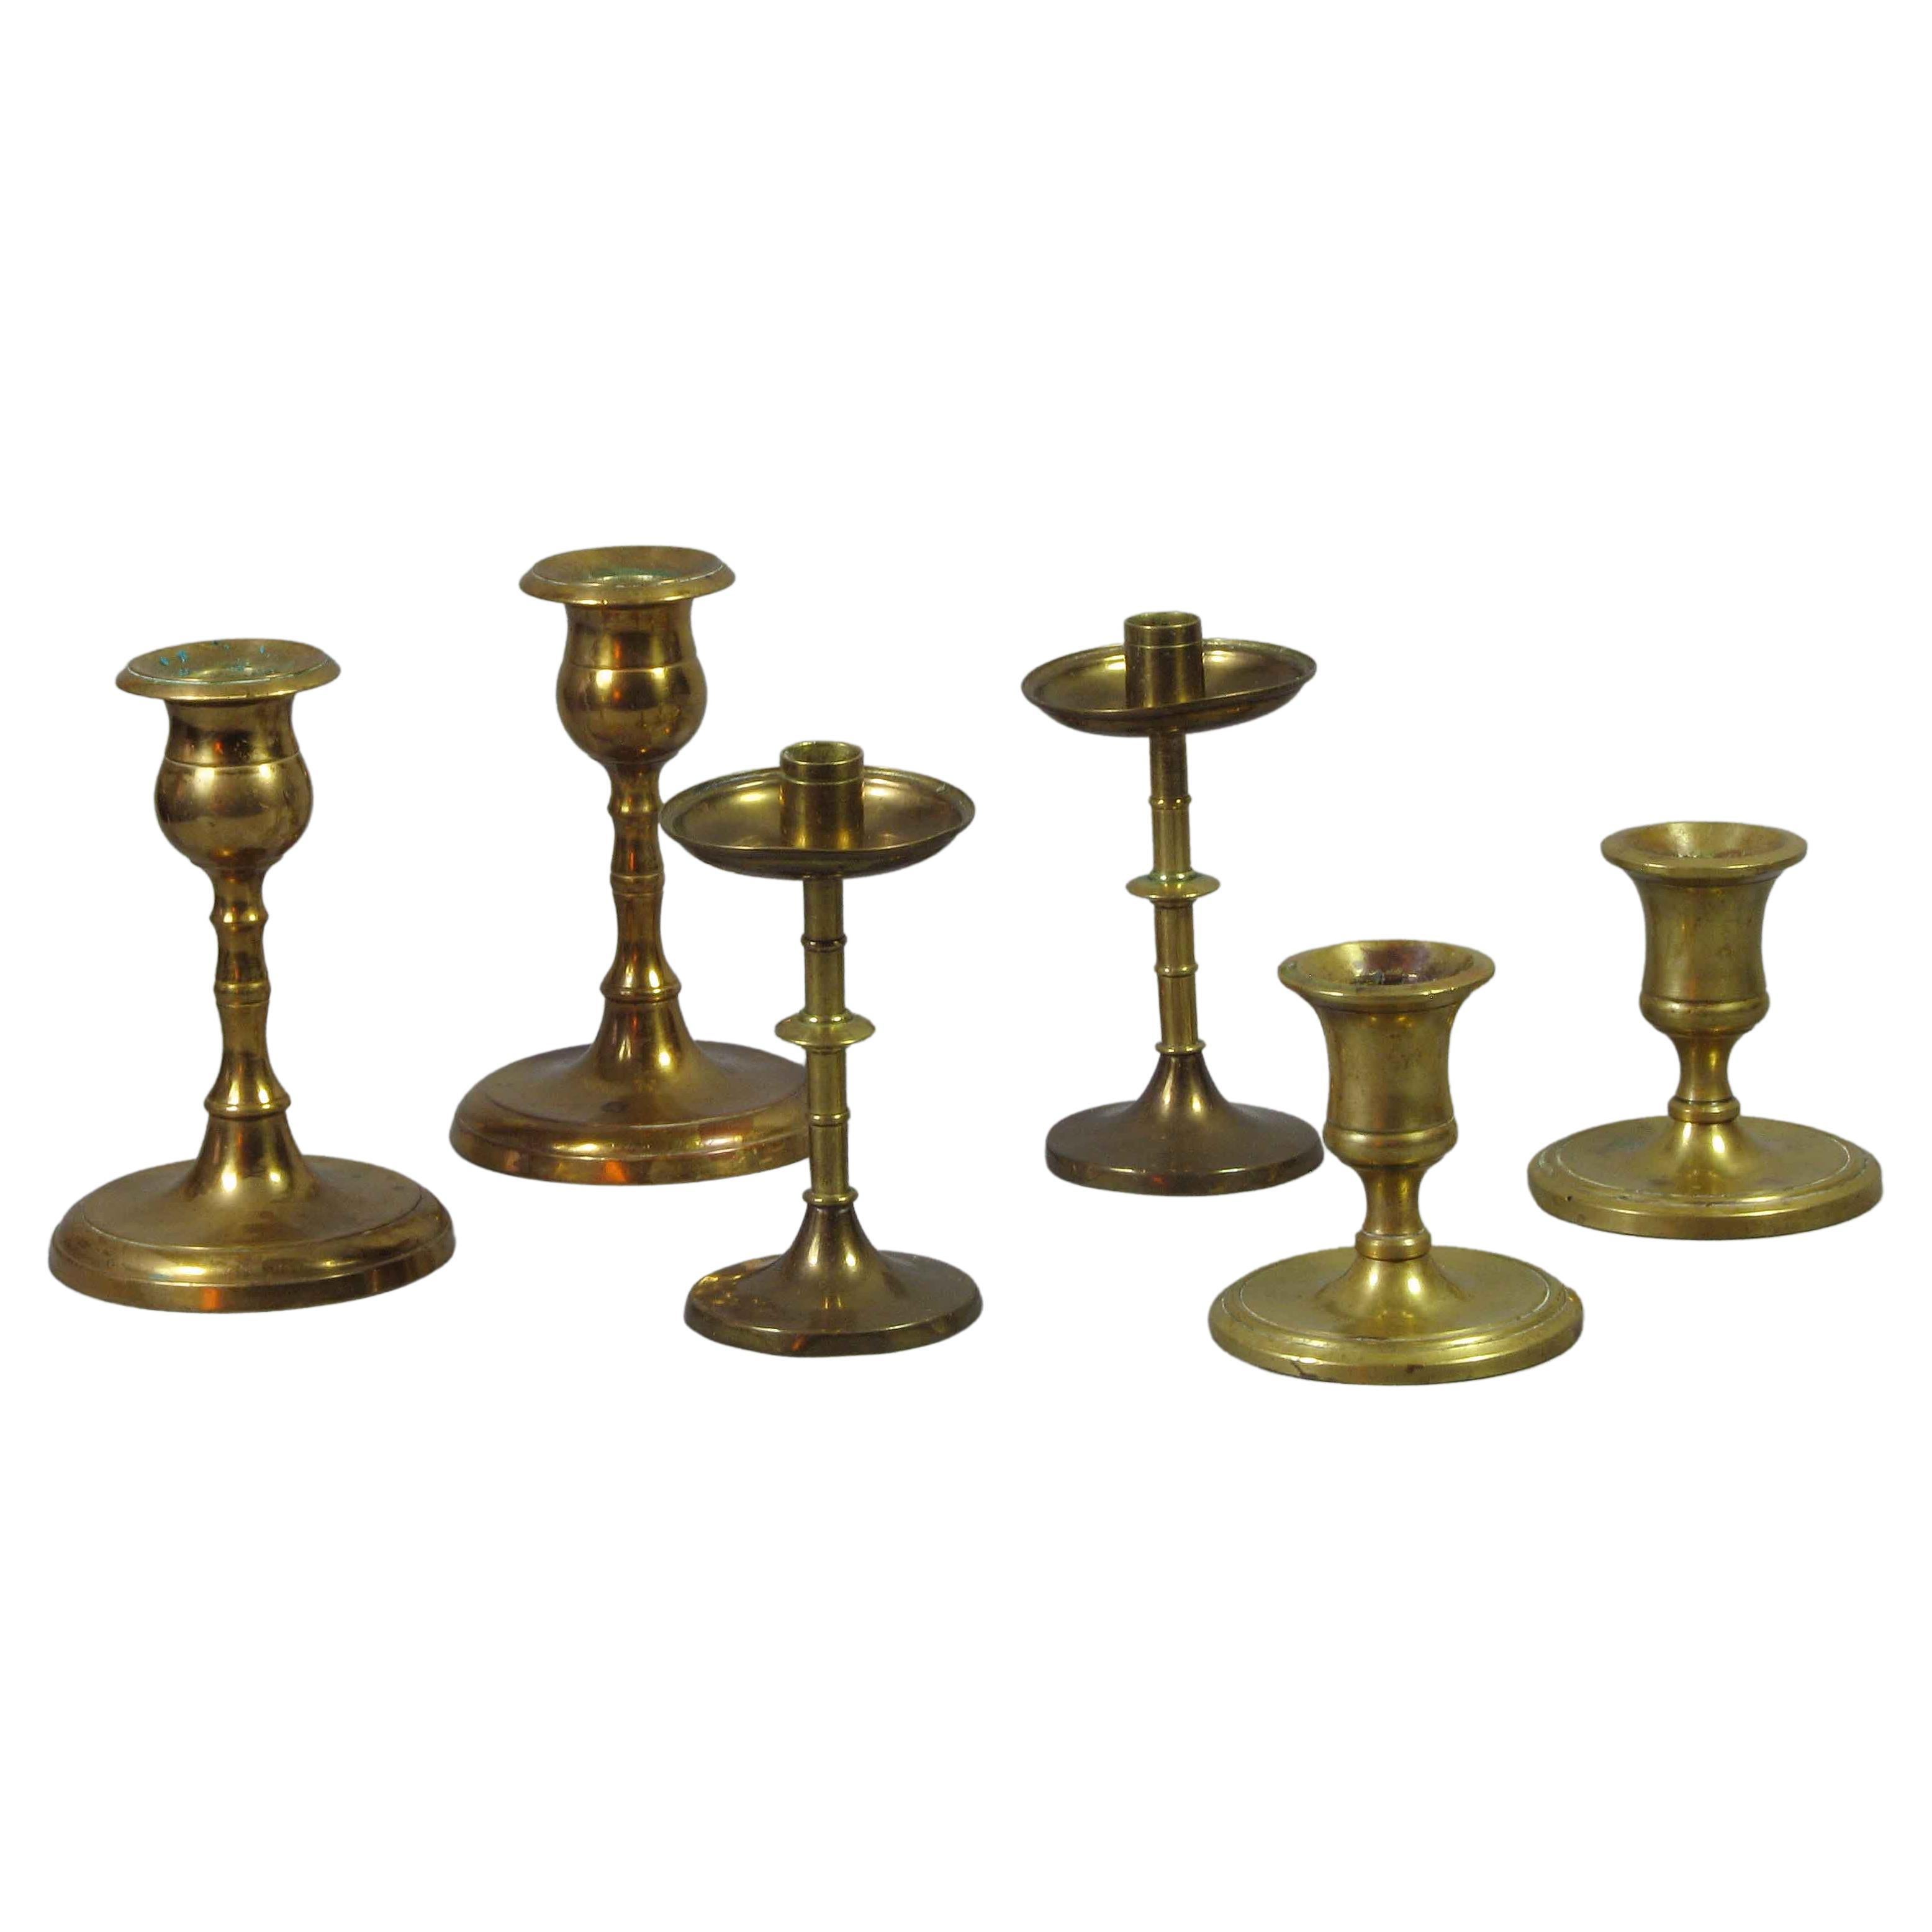 Three Pairs of Brass Candlesticks, 19th Century For Sale